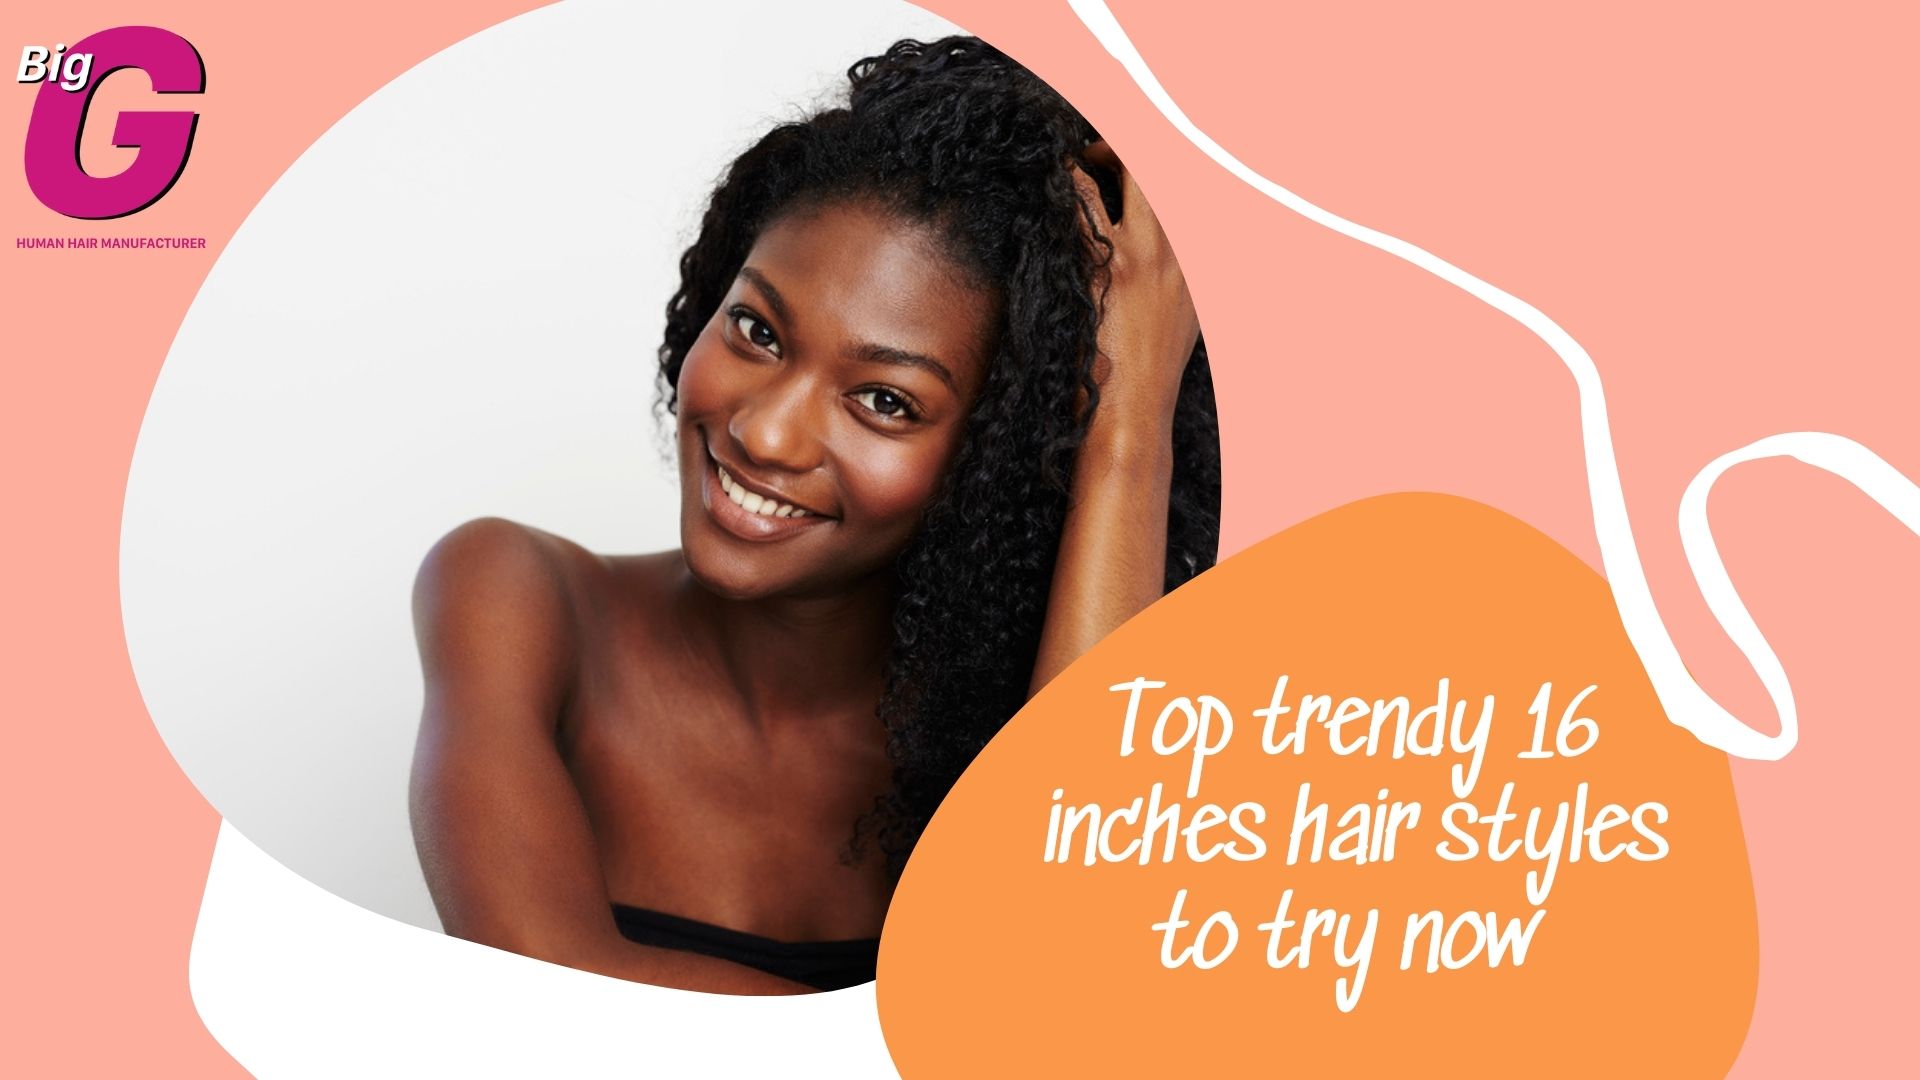 7 styles with 16 inches hair that's never out of trend